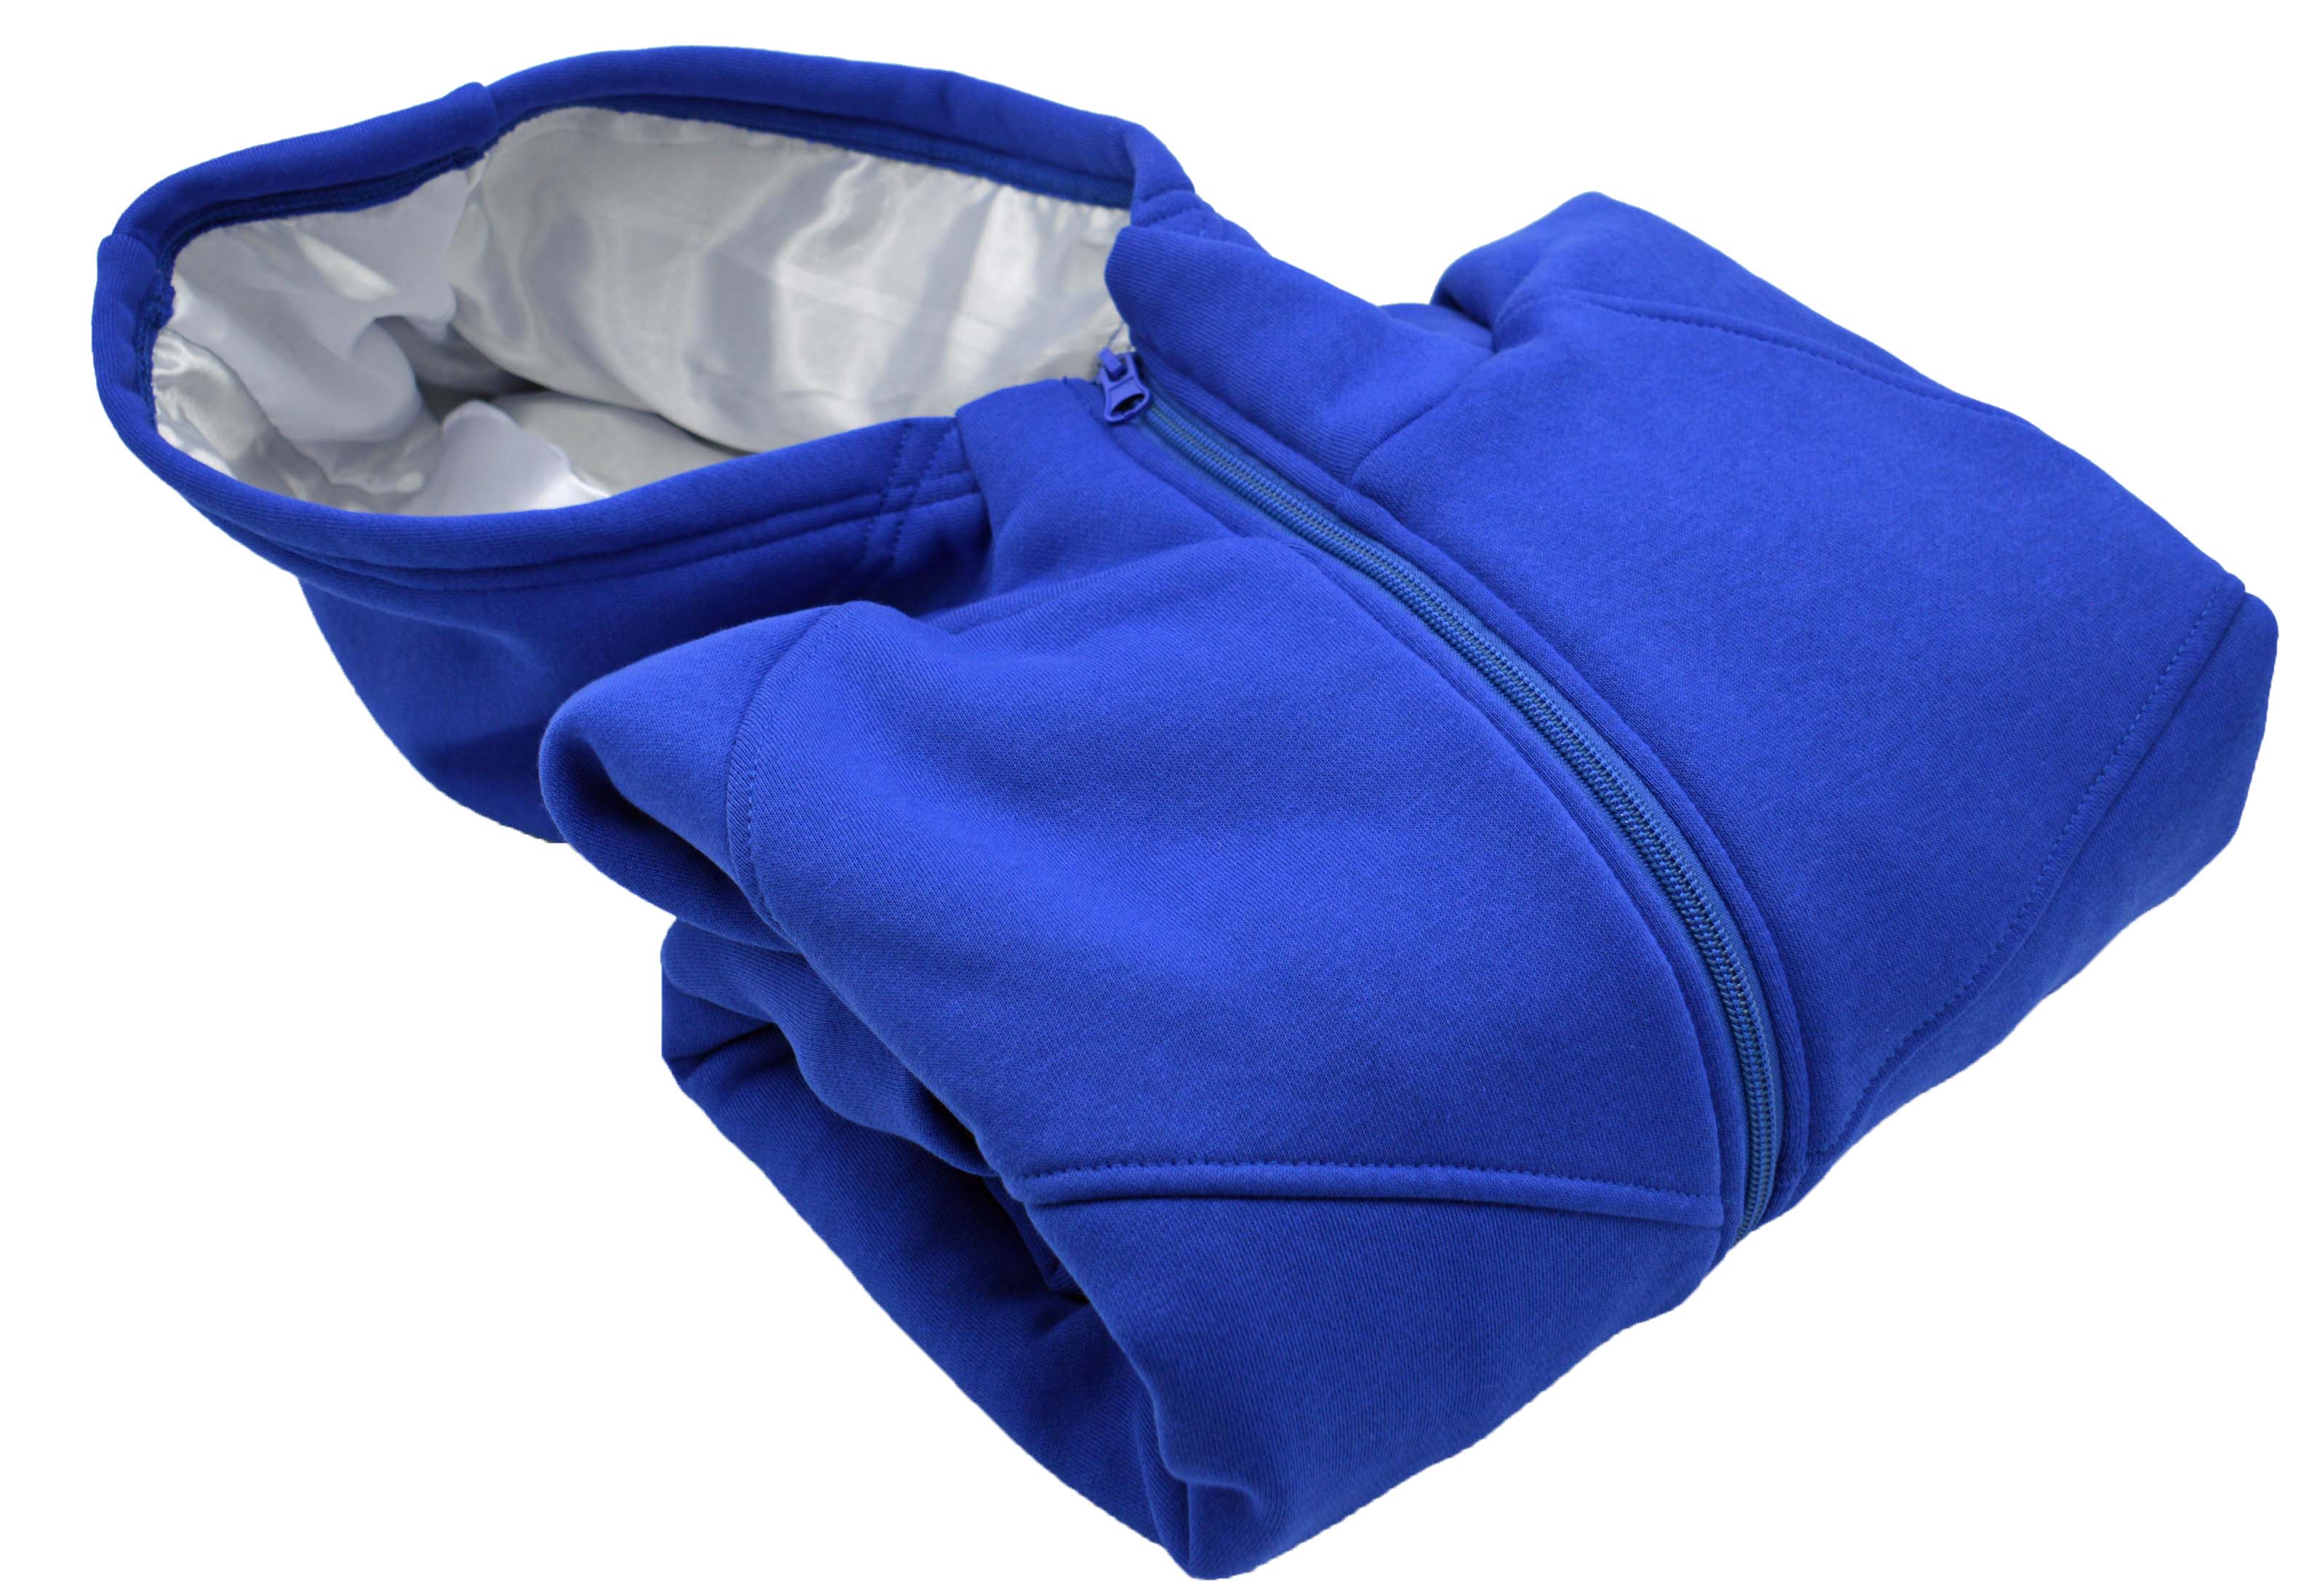 Women's Satin Lined Hoodie (Royal Blue and Pure White Satin) – Keep Your  Hair Headgear, LLC